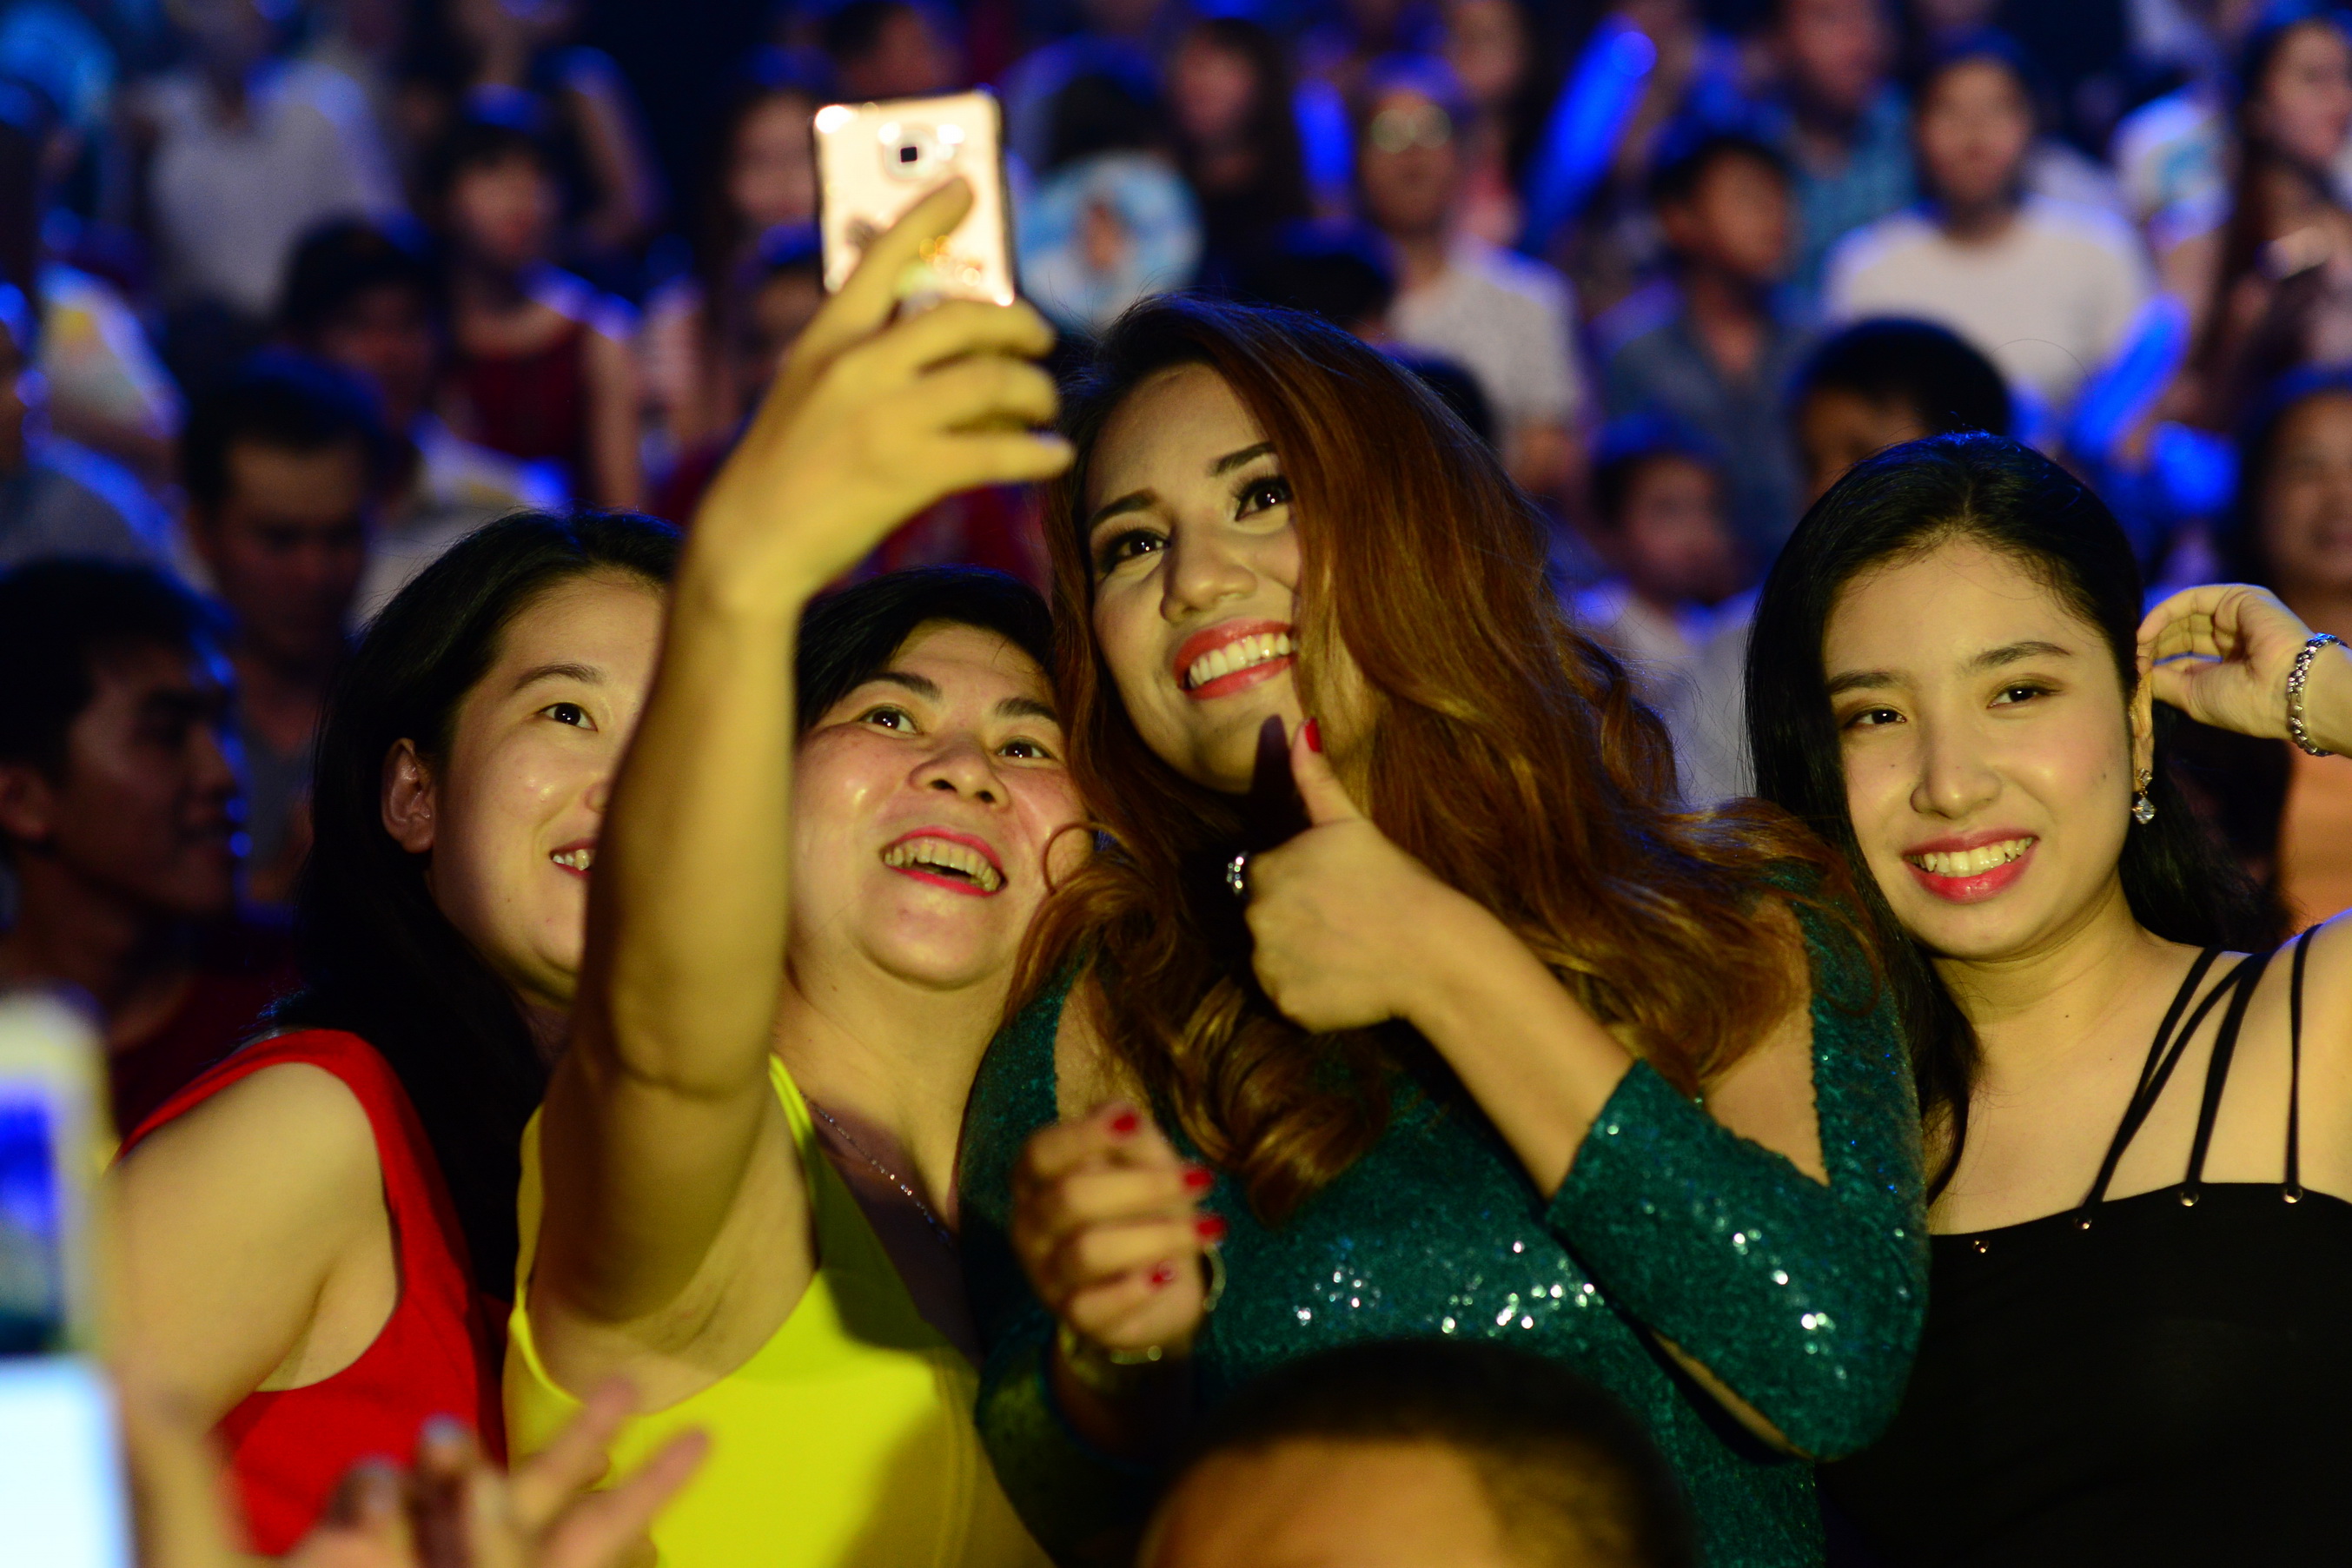 Janice Phuong poses for pictures with her fans at Vietnam Idol 2016. Photo: Tuoi Tre